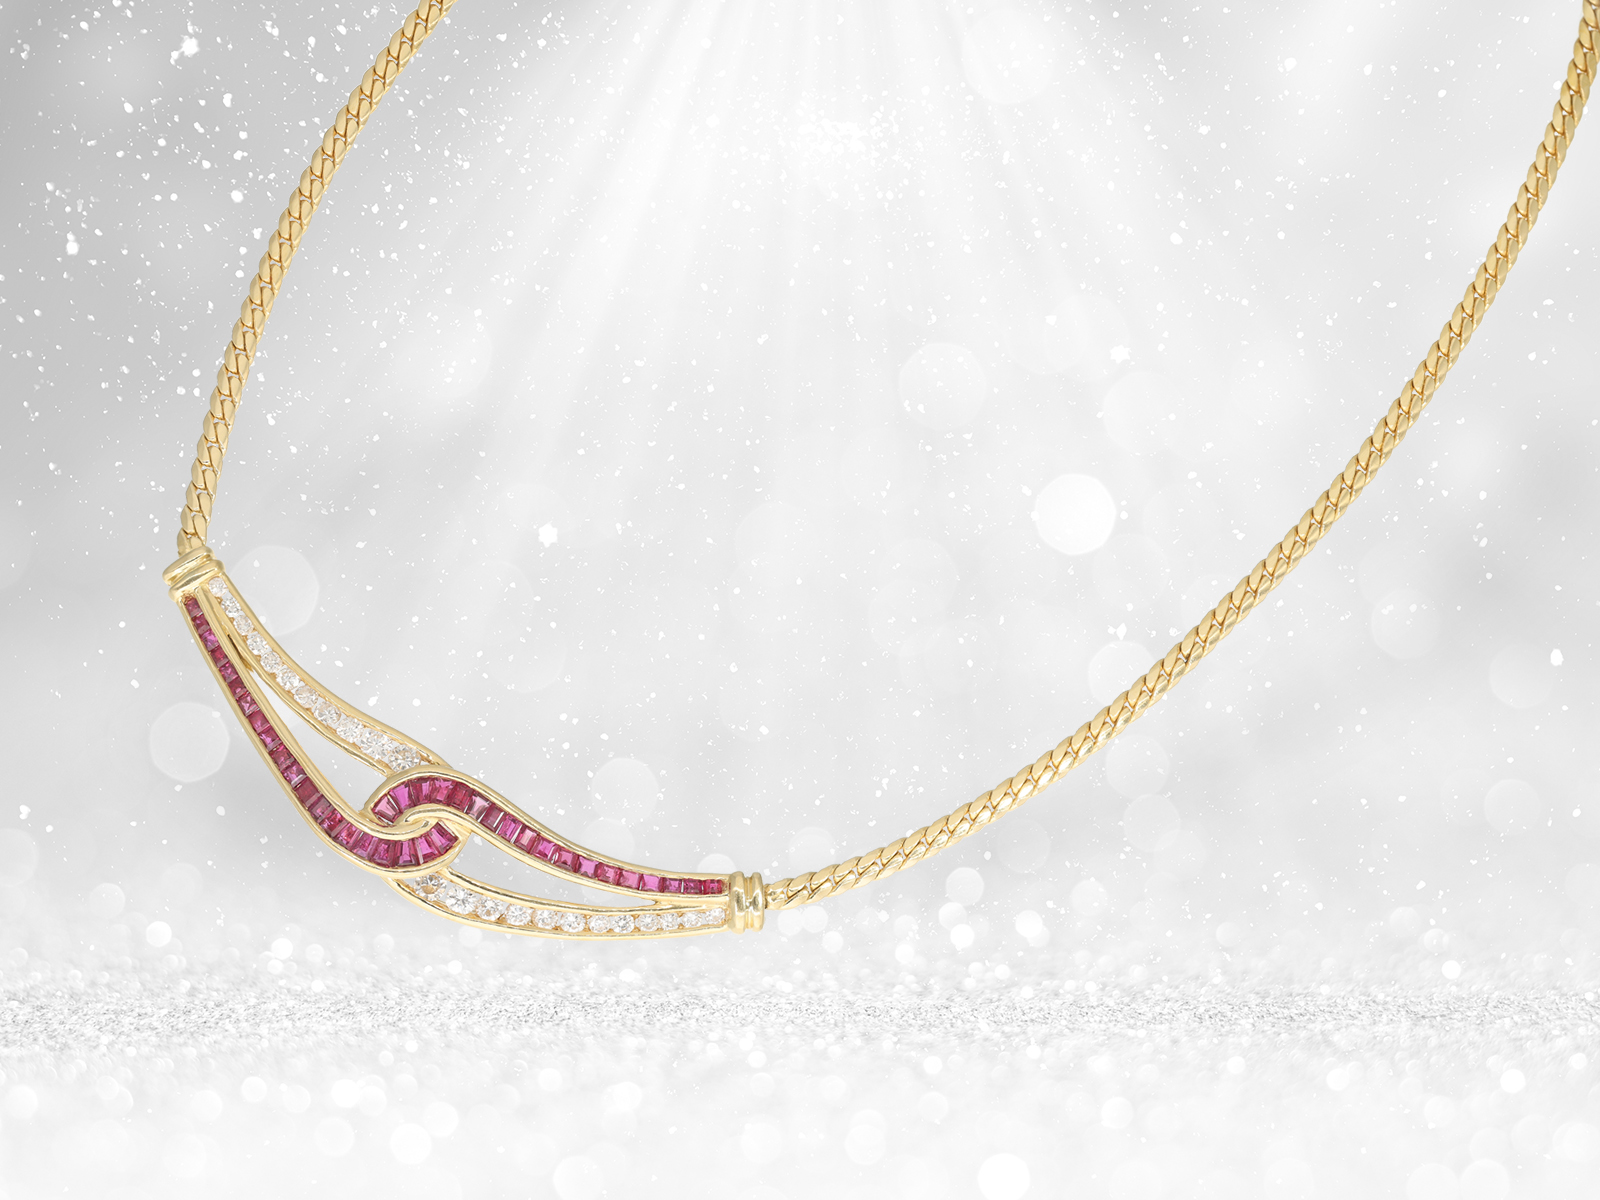 Necklace: high-quality vintage brand jewellery by Bucherer, finest rubies and brilliant-cut diamonds - Image 2 of 3